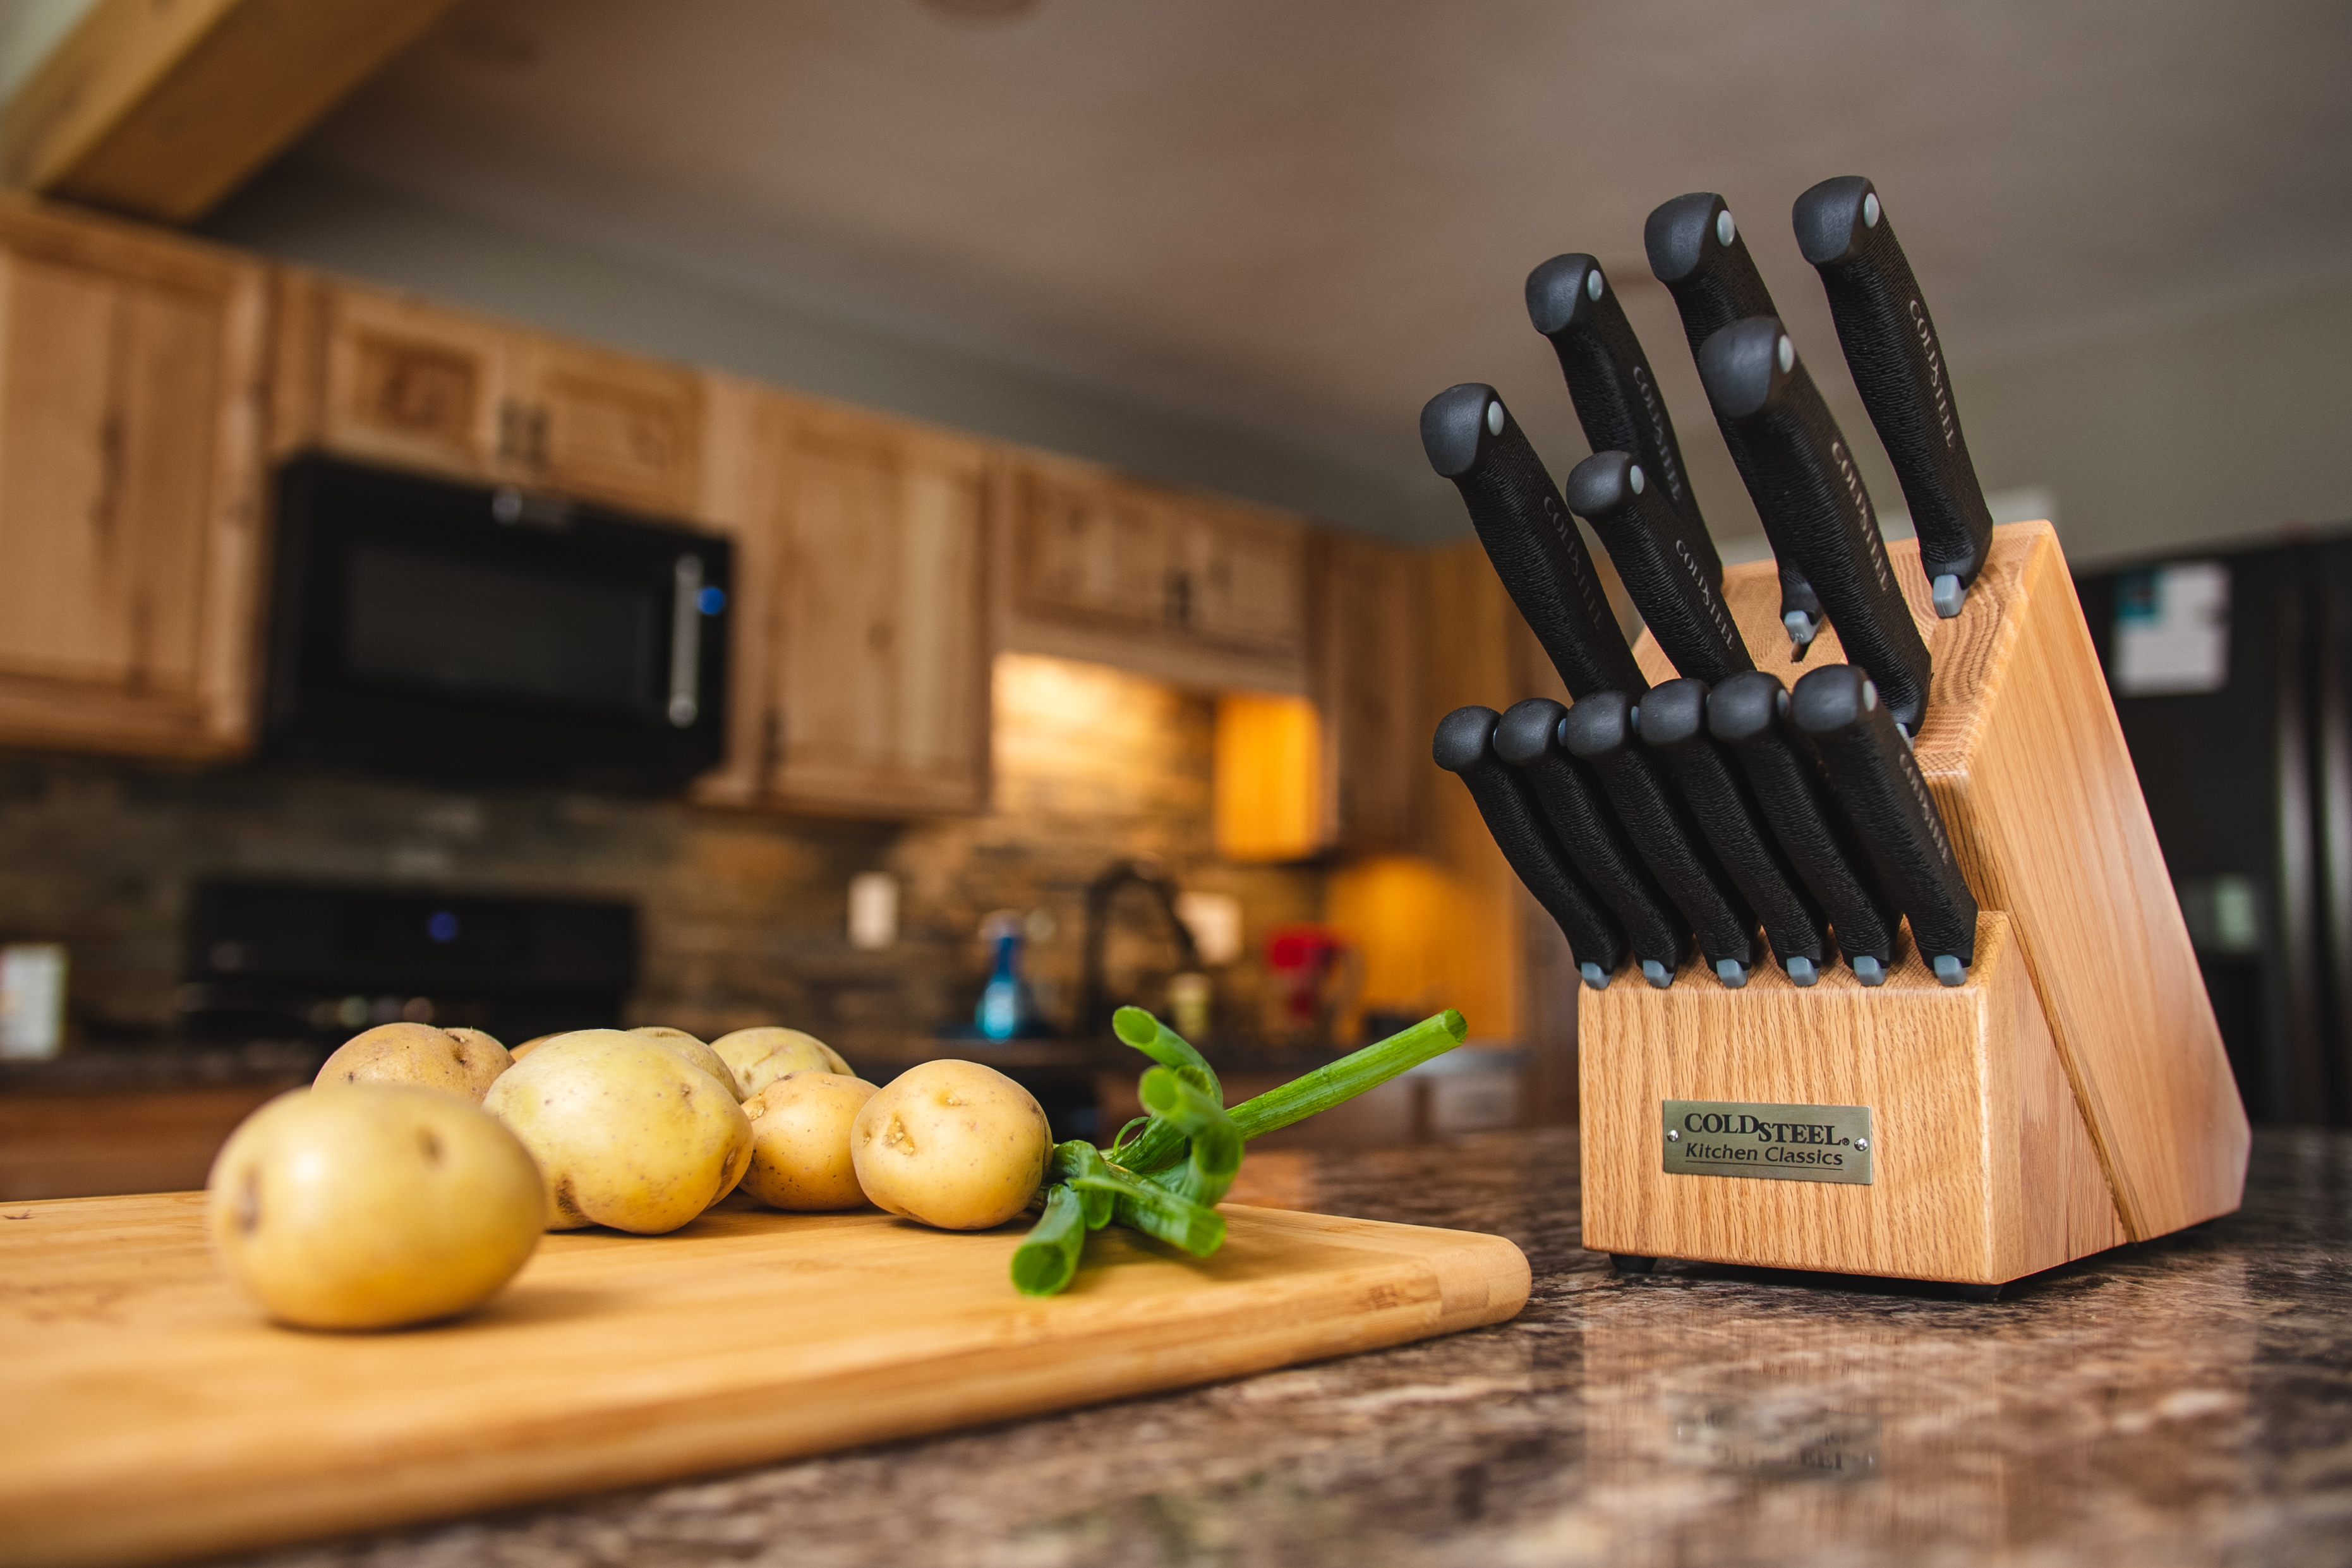 Essential Kitchen Small Knife Set - COOL HUNTING®